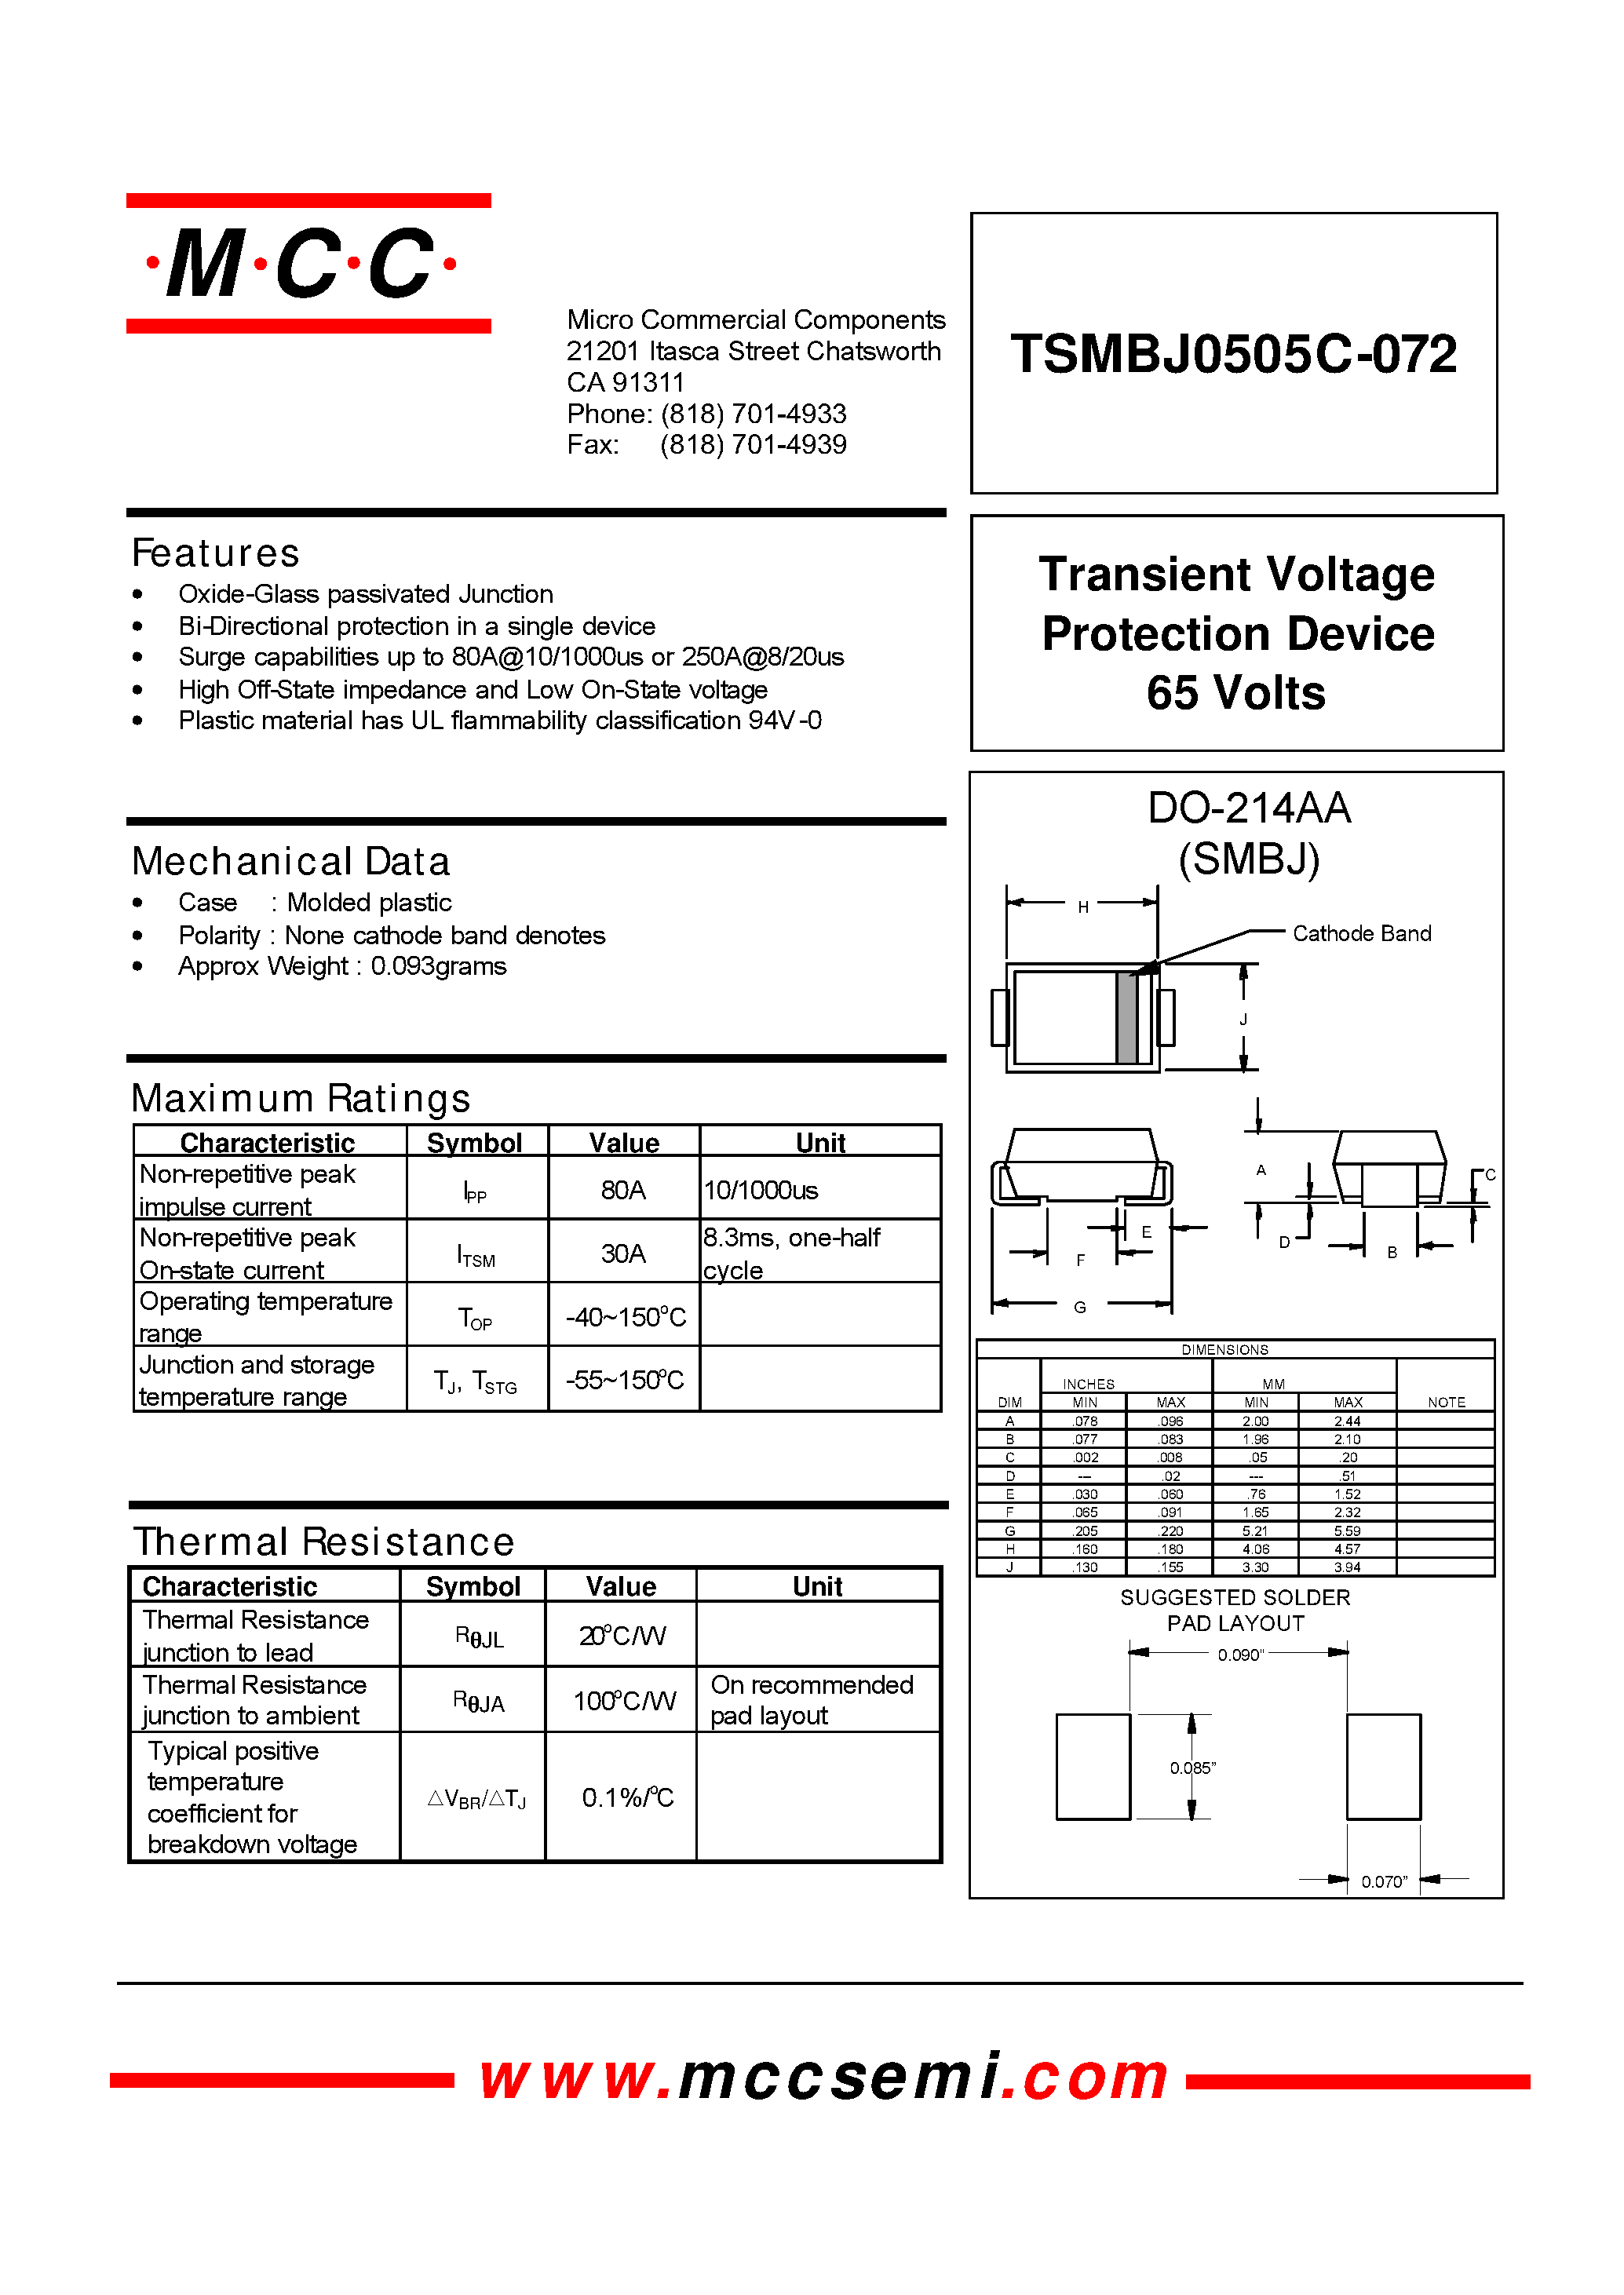 Datasheet TSMBJ0505C-072 - Transient Voltage Protection Device 65 Volts page 1